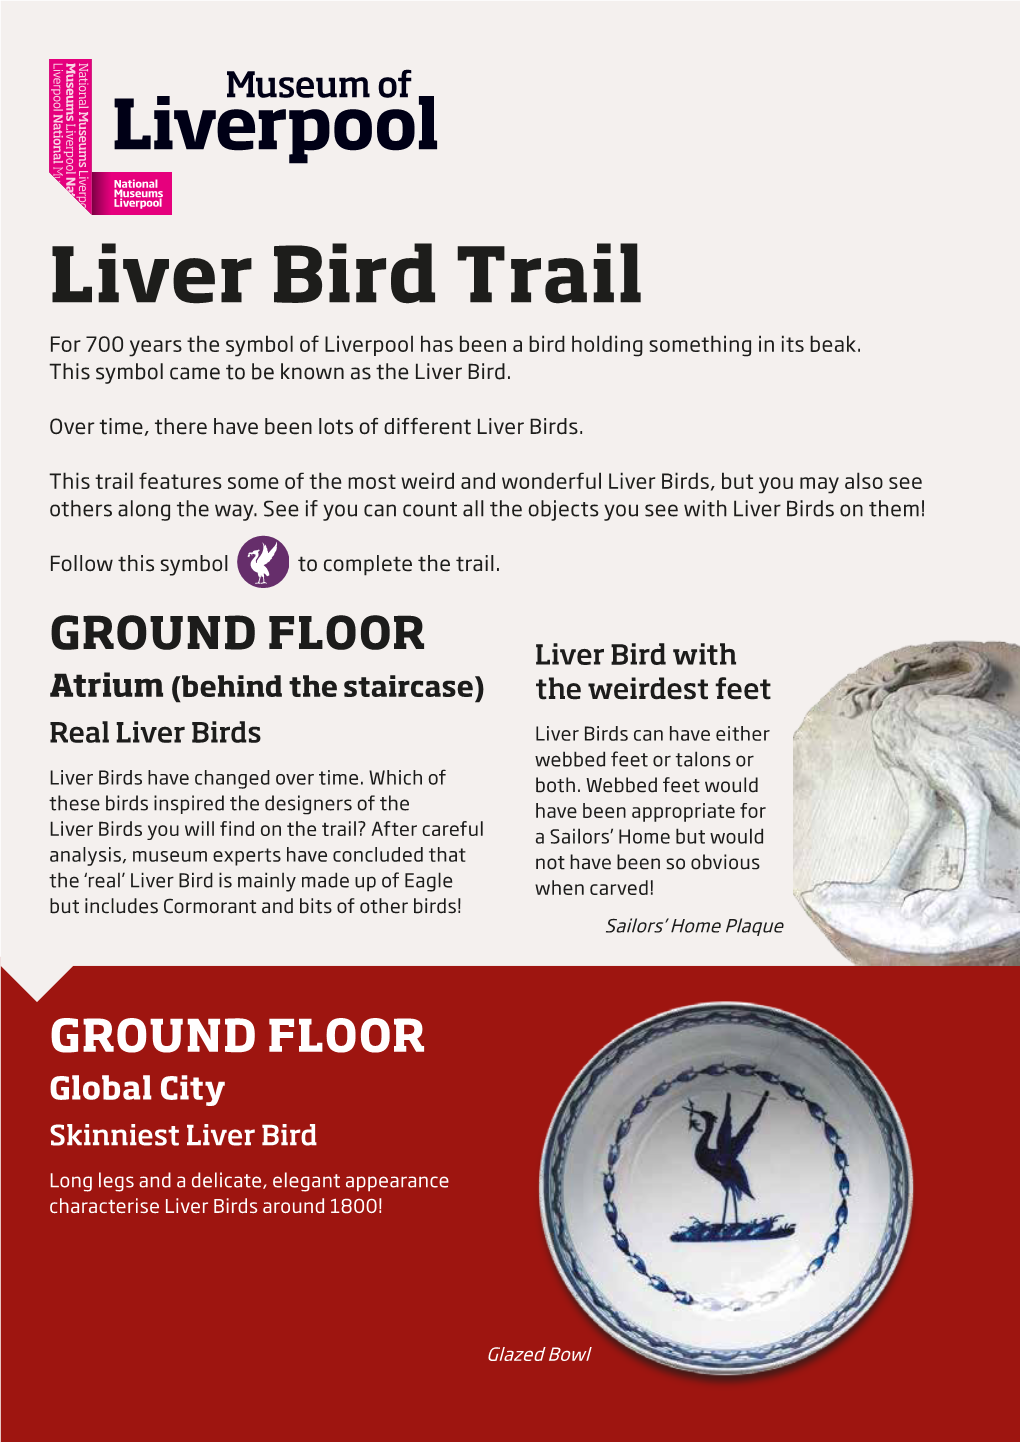 Liver Bird Trail for 700 Years the Symbol of Liverpool Has Been a Bird Holding Something in Its Beak